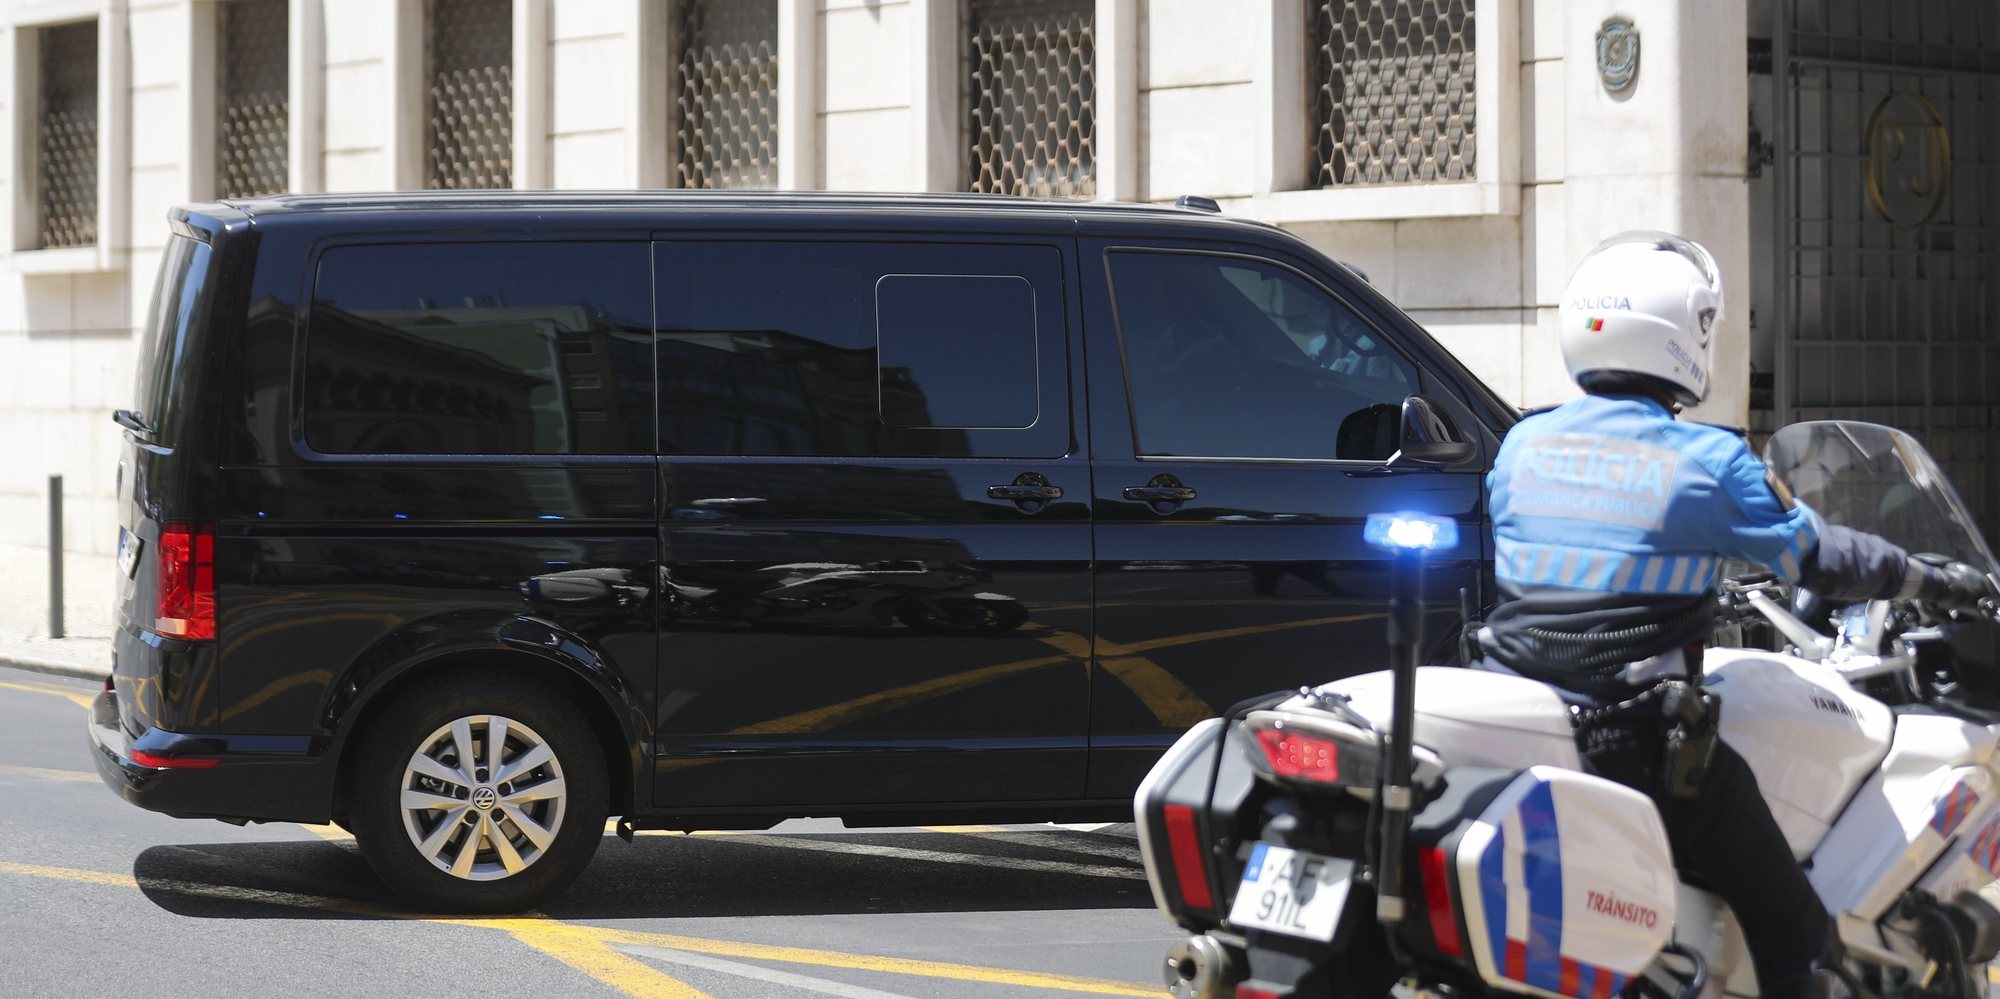 A Police car transports four detained people, among them the entrepreneur and president of Benfica Luis Filipe Vieira, arrives at the Central Court of Criminal Instruction to be heard in the first judicial questioning following his detention on Wednesday as part of an investigation into alleged crimes of swindling, tax fraud, and money laundering, in Lisbon, Portugal, 08 July 2021. Luis Filipe Vieira is one of four people detained, who, according to the Central Department of Investigation and Prosecution (DCIAP), are suspected of being involved in &quot;business and financing in a total amount exceeding 100 million euros, which may have entailed high losses for the state and for some of the companies&quot;. MIGUEL A. LOPES/LUSA